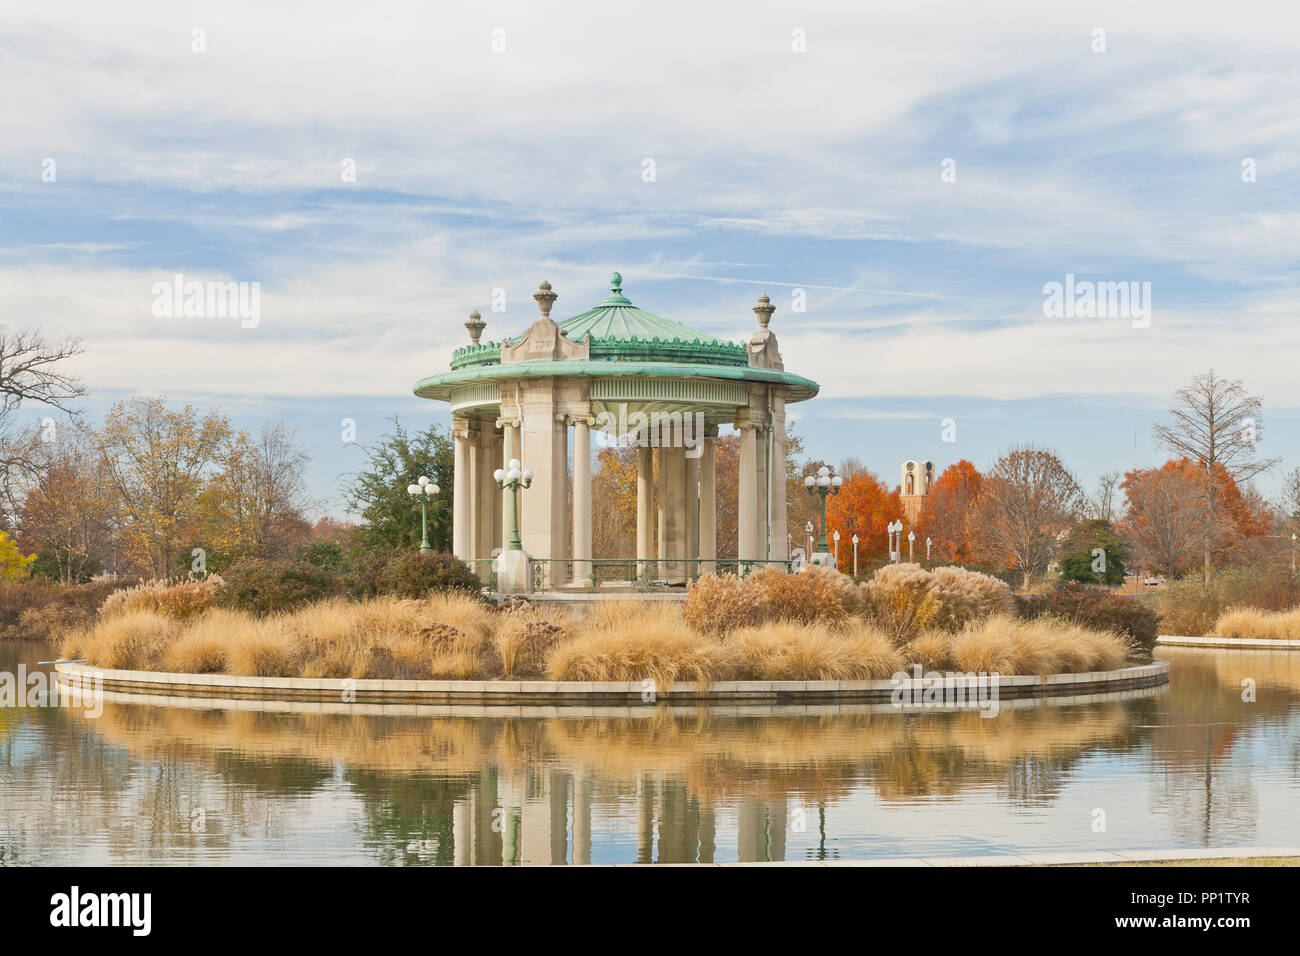 San Luigi Forest Park's Nathan Frank Bandstand in autunno. Foto Stock